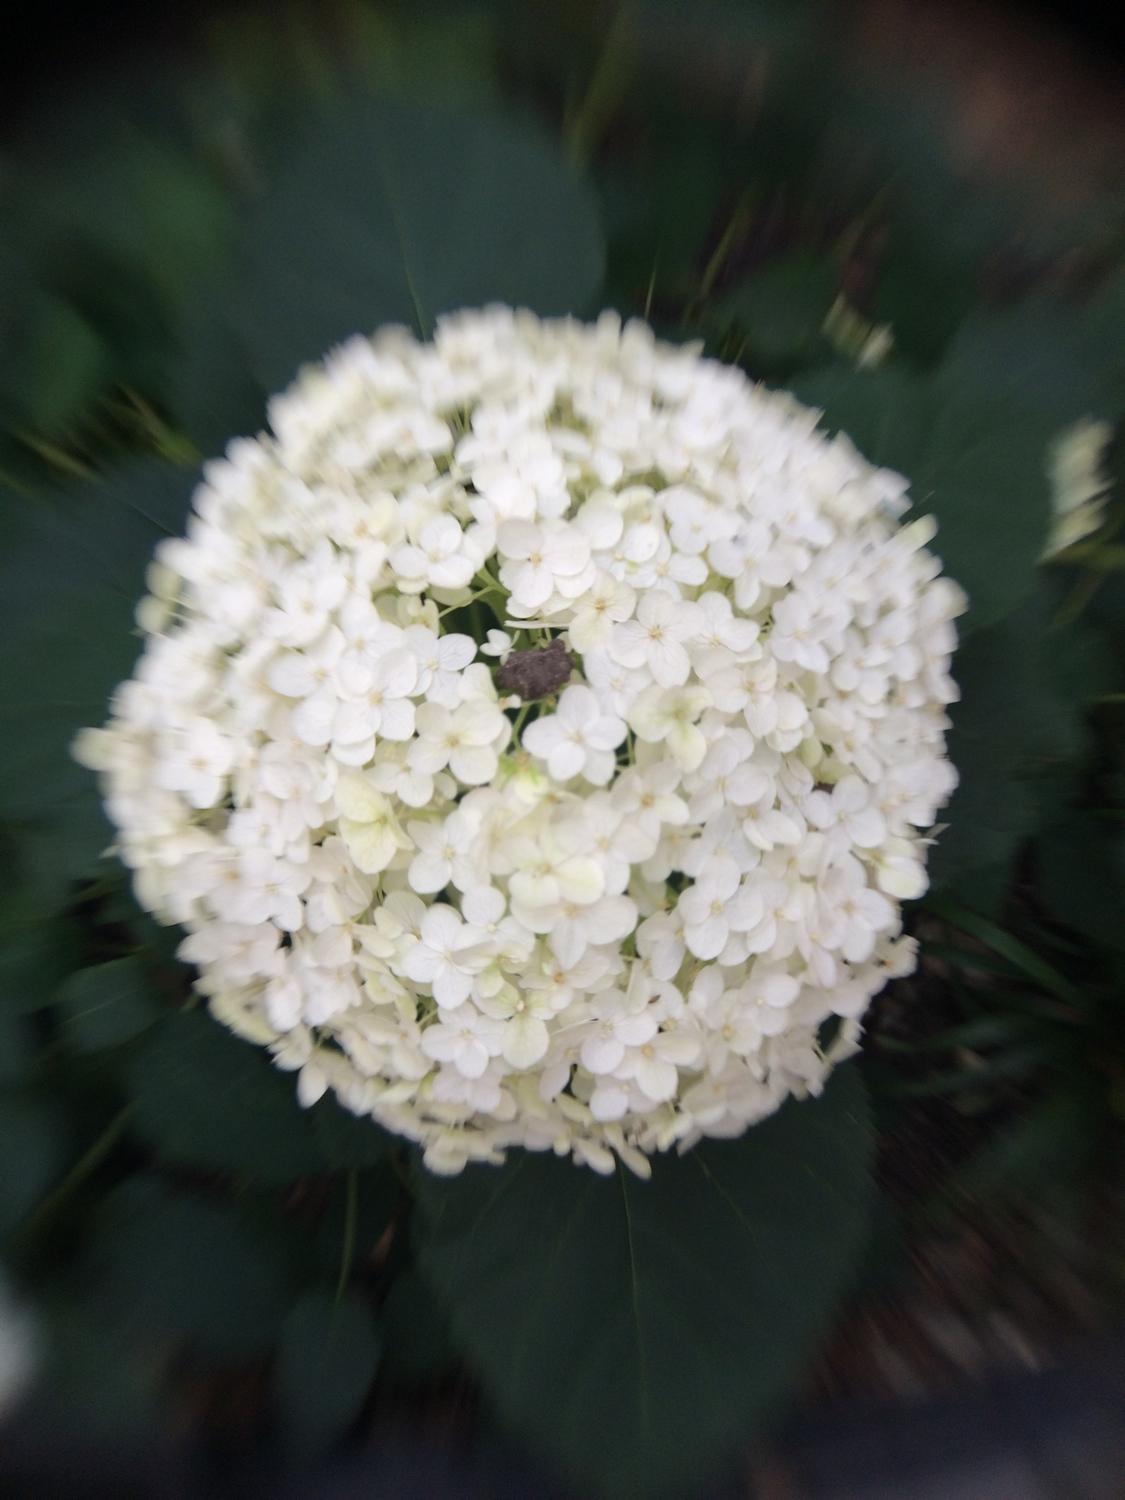 blurs arent defects but the charm in lensbabys new mobile lens kit lensbaby creative sample 3